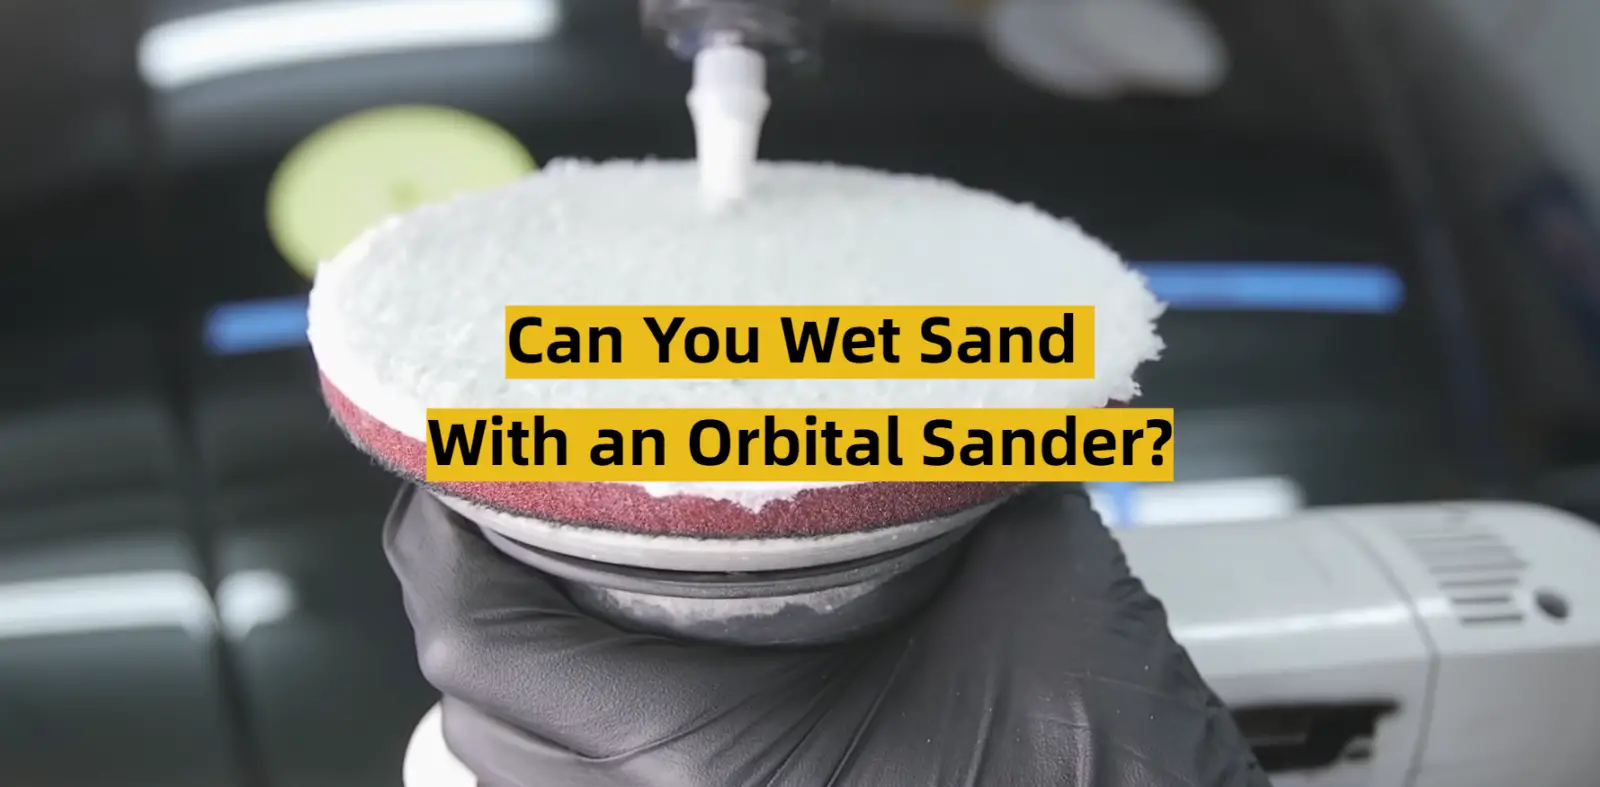 Can You Wet Sand With an Orbital Sander?